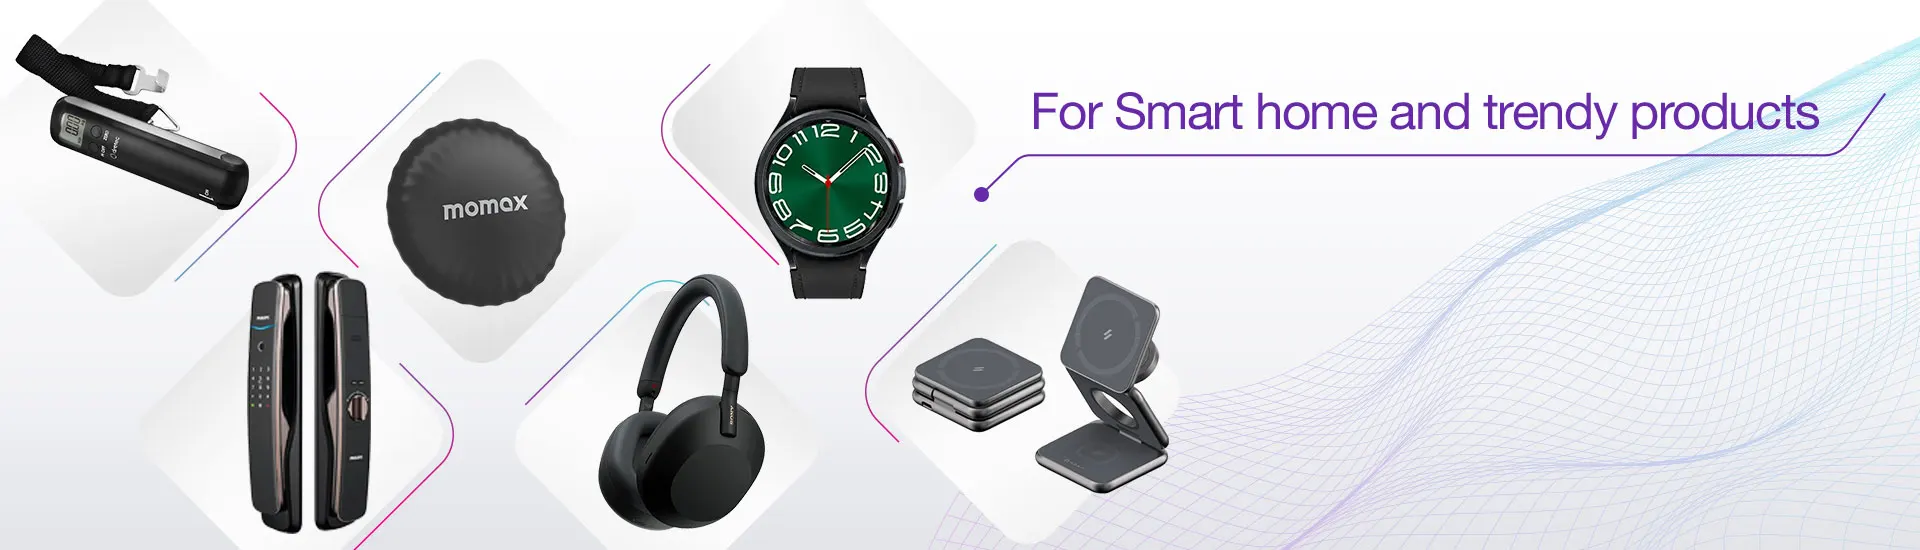 Add-on Offer $9/mth up for smart home and trendy products